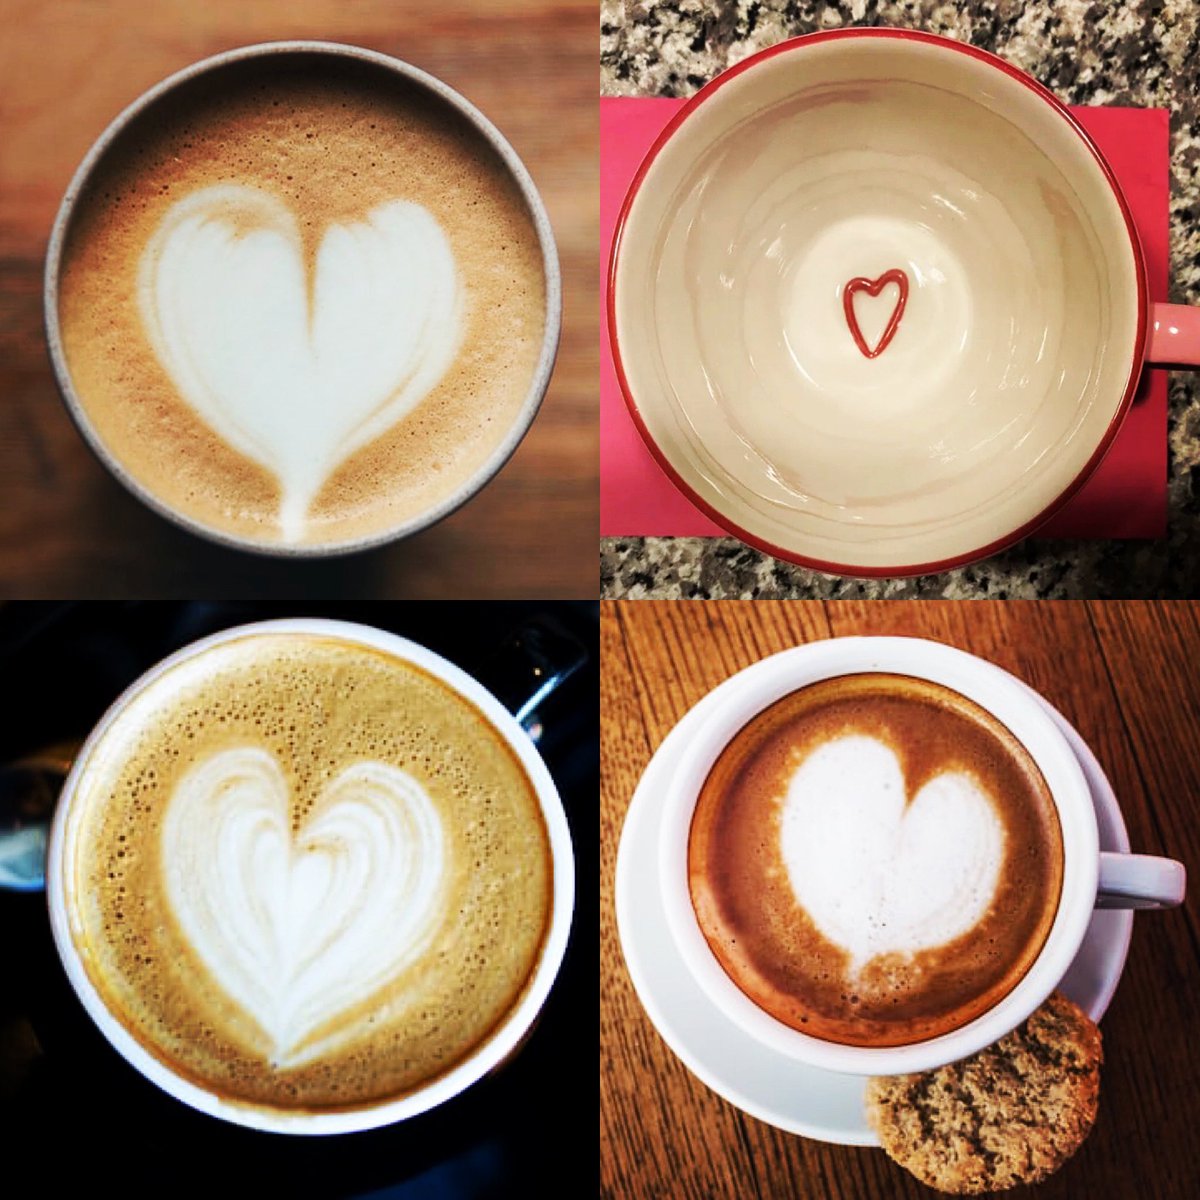 ❤️ Above all else, guard your heart, for everything you do flows from it.  Proverbs 4:23

#GuardYourHeart #❤️ #CupOfLove #FilledWithJoy #Love #LatteHearts #LatteLove #LatteArt #CoffeeForLife #TeaForLife #CoffeeLove #CoffeeLover #TeaLover #CoffeeBreak #TeaTime #ChelsCups